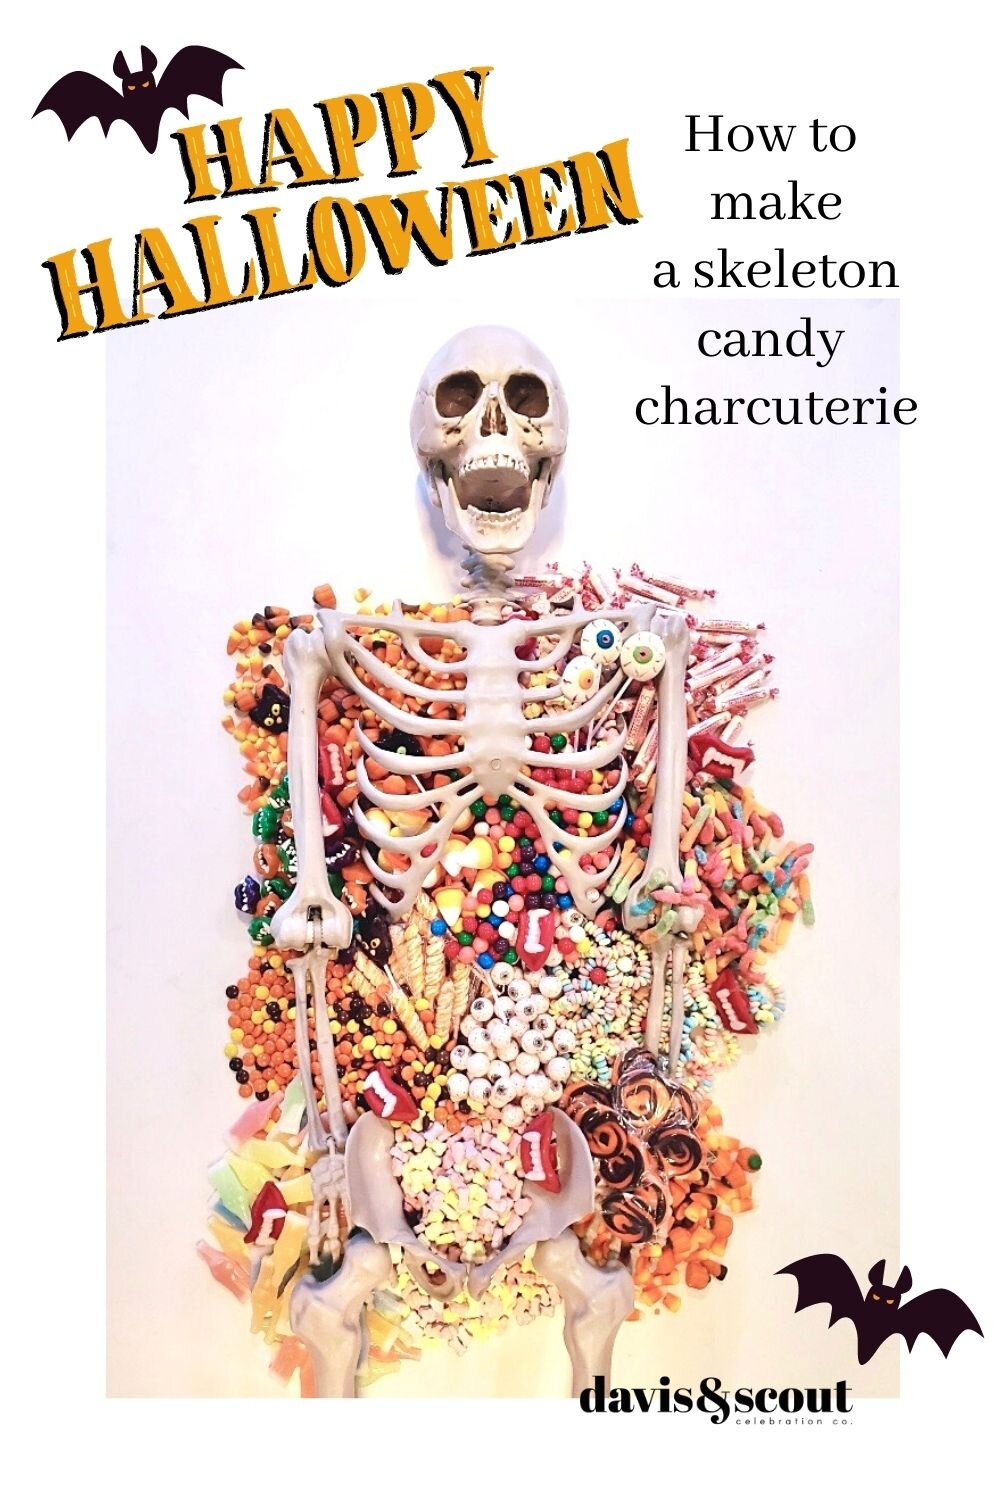 How to make a skeleton candy charcuterie.jpg